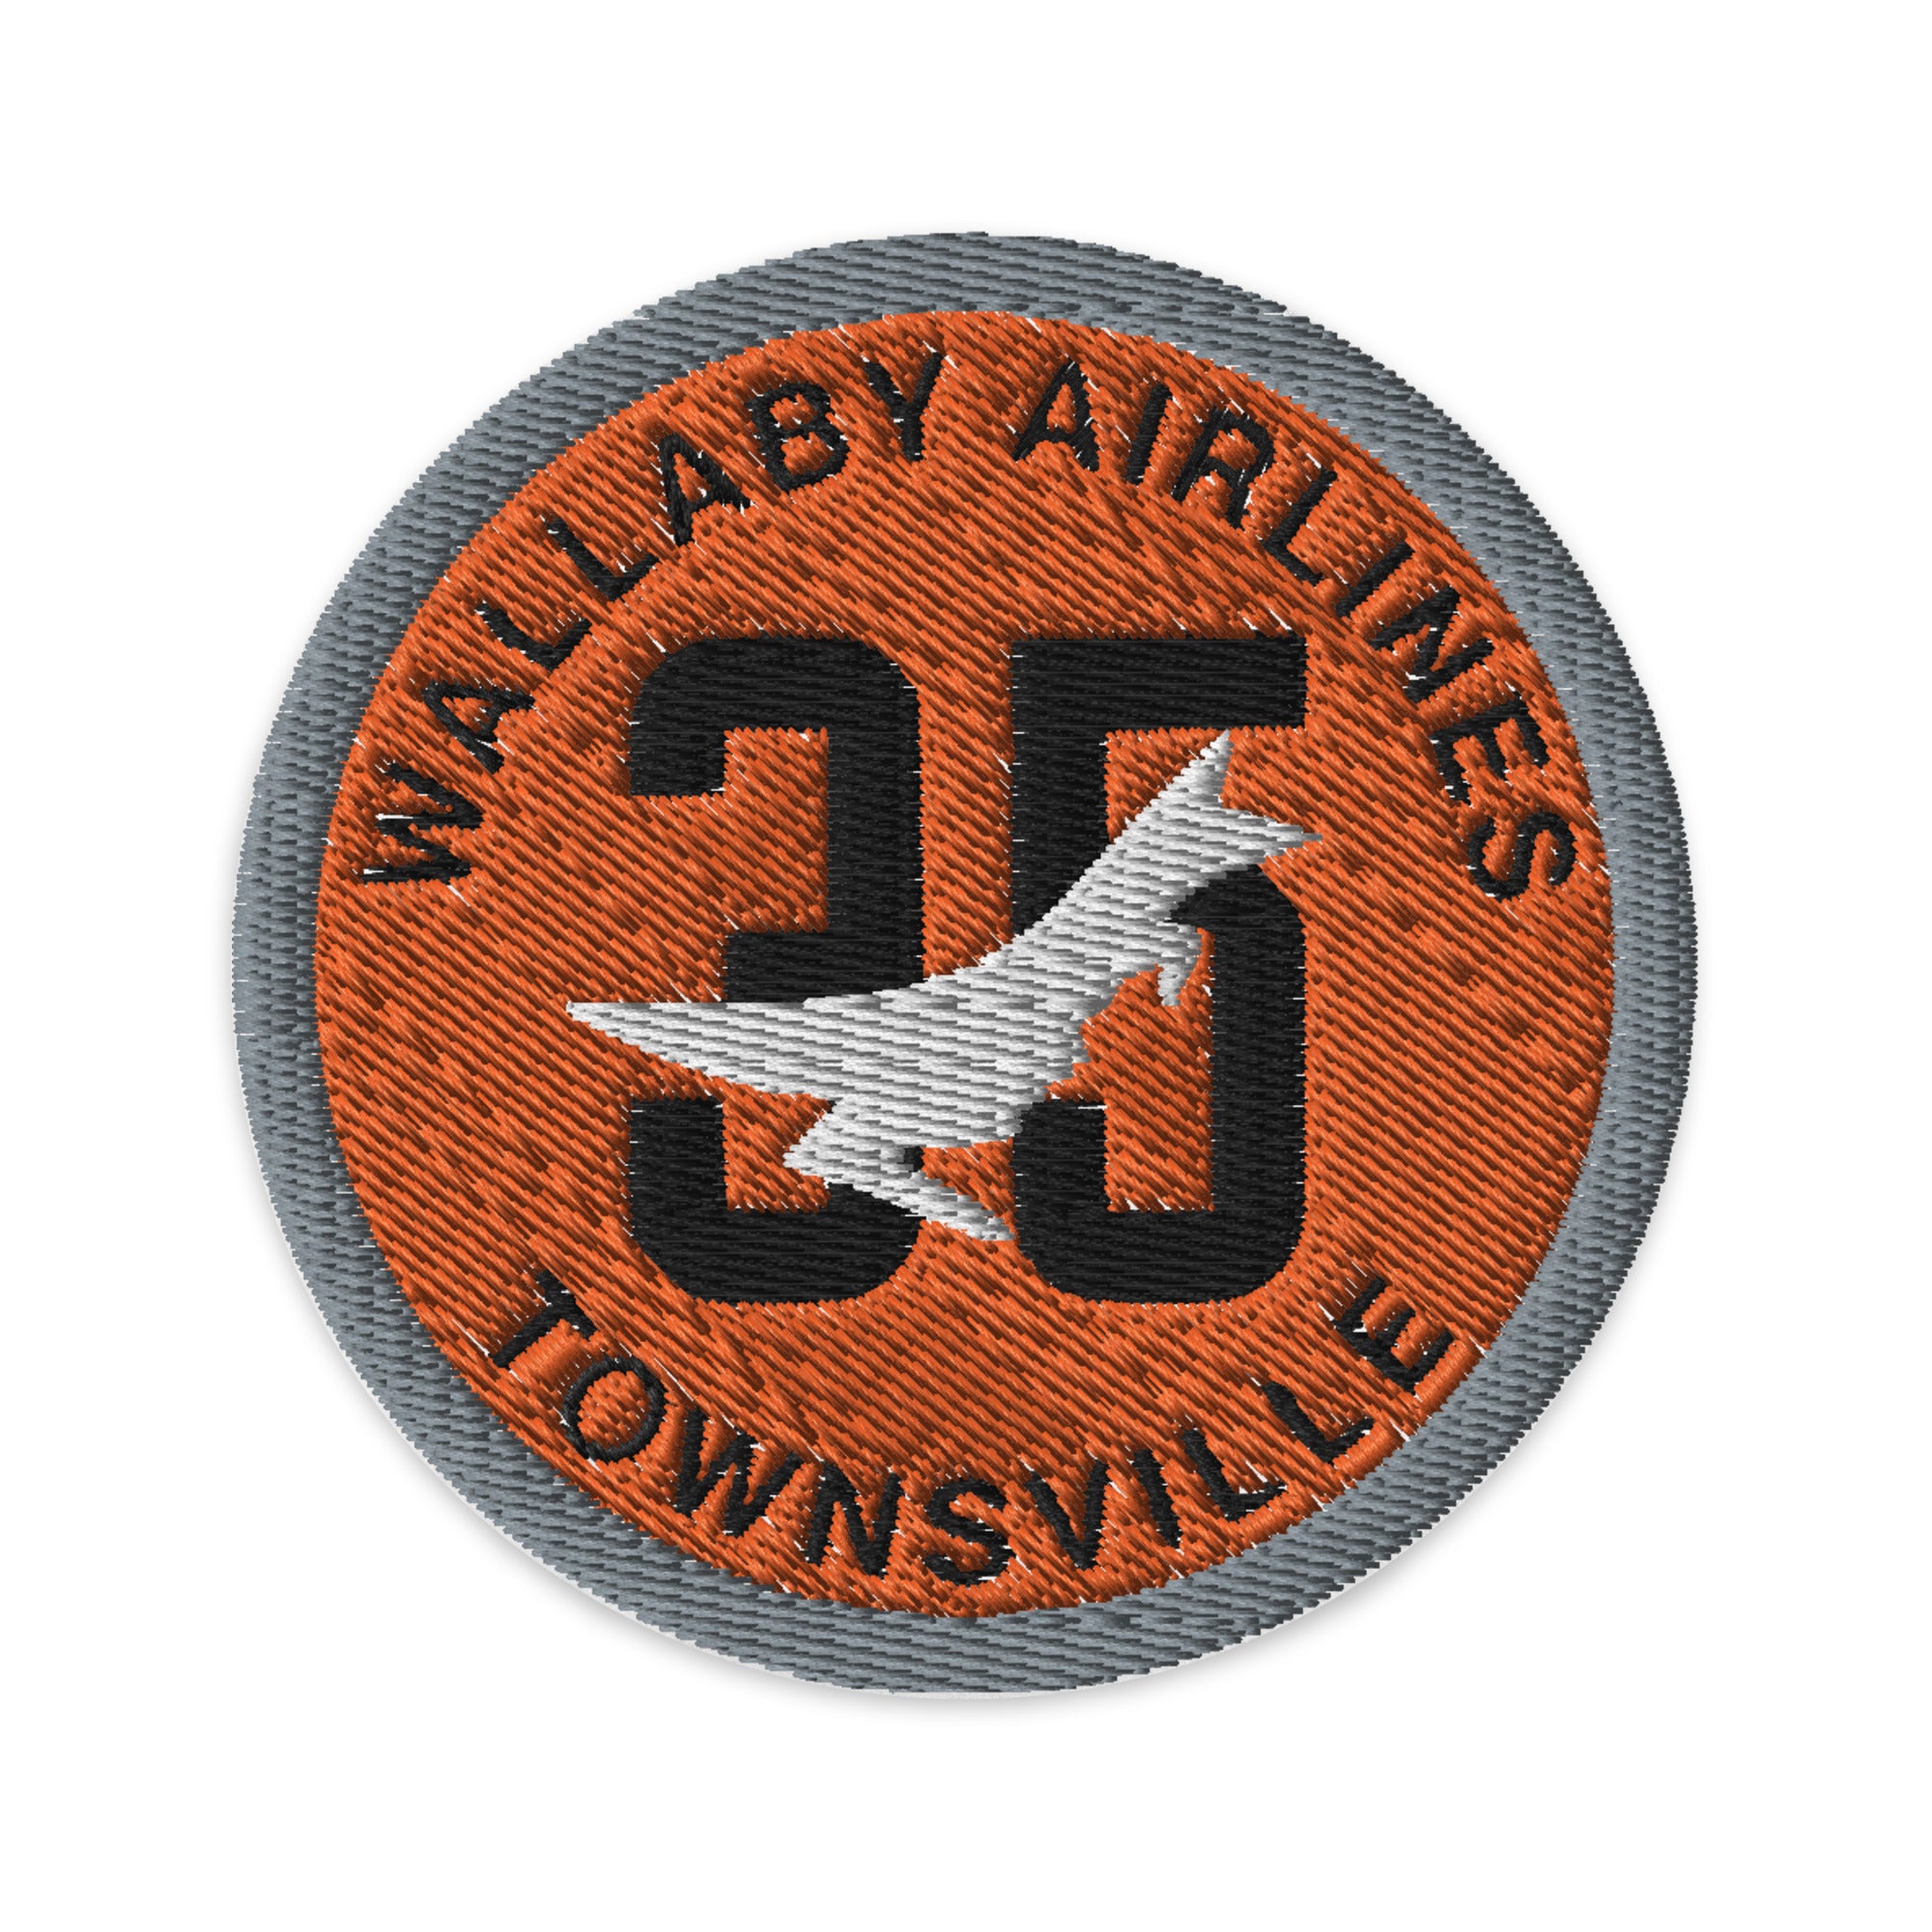 35Sqn Wallaby Airlines Embroidered patches - I Love a Hangar